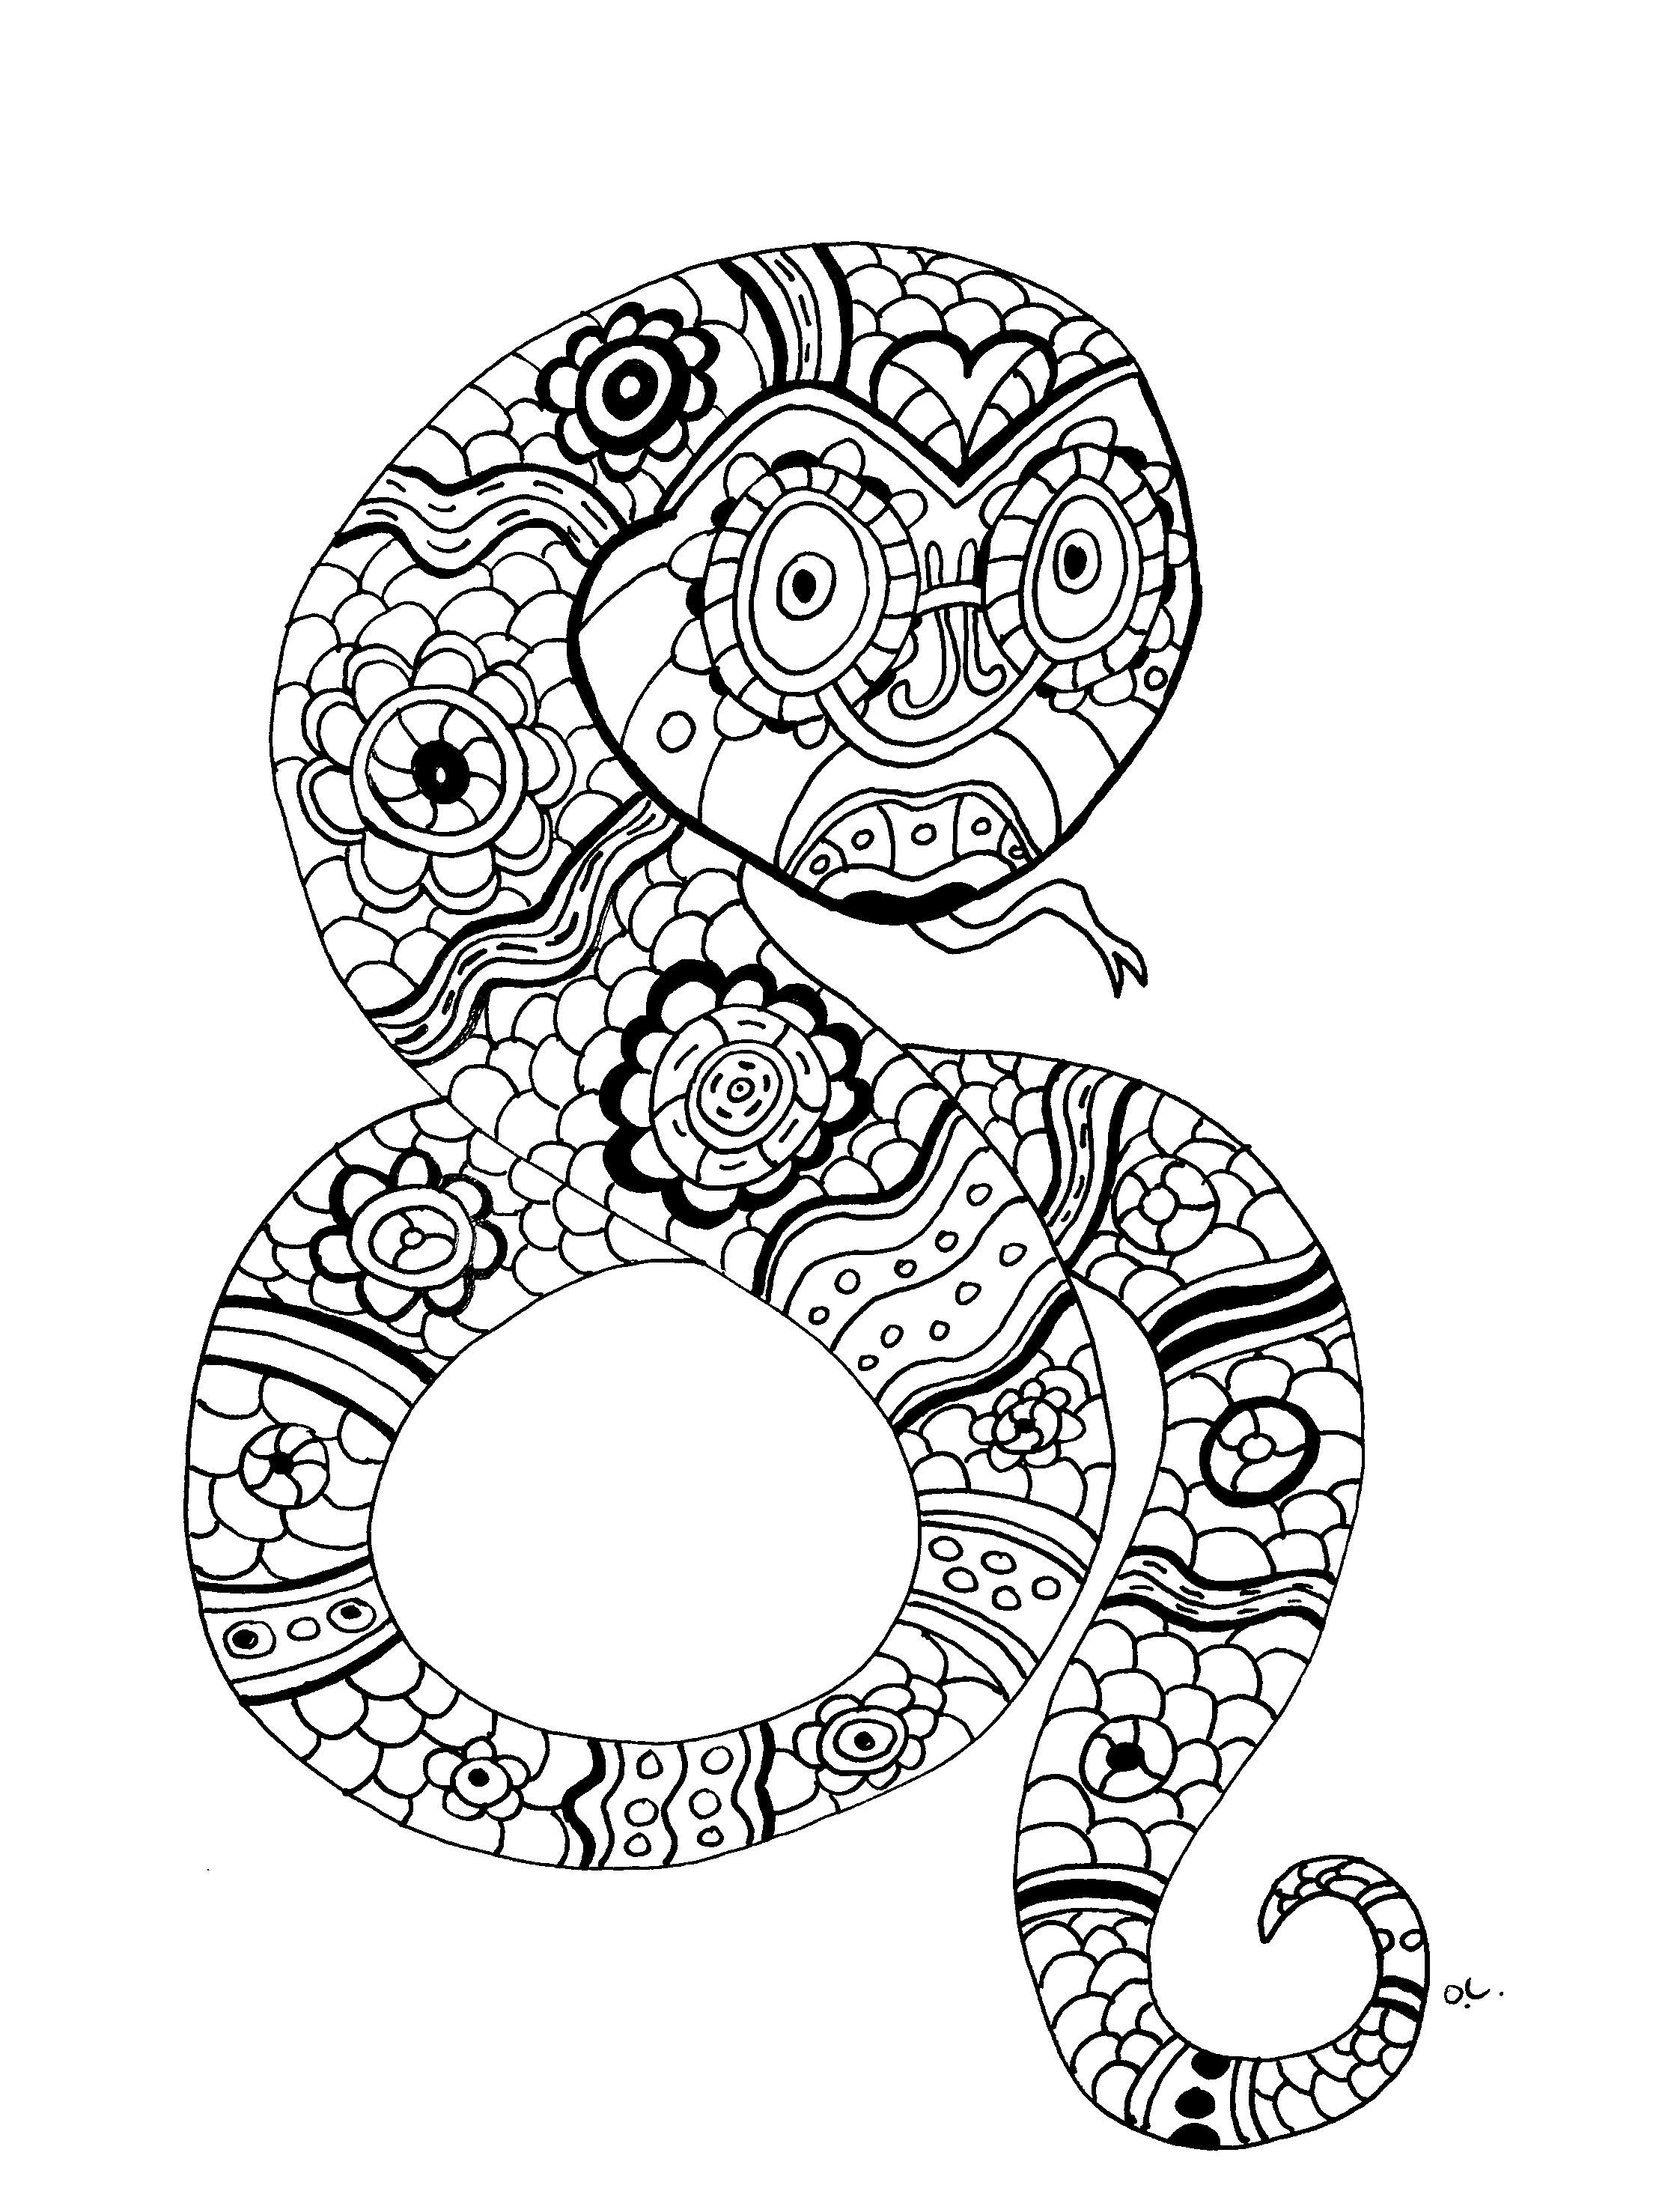 Download The snake by oliv | Animals - Coloring pages for adults ...